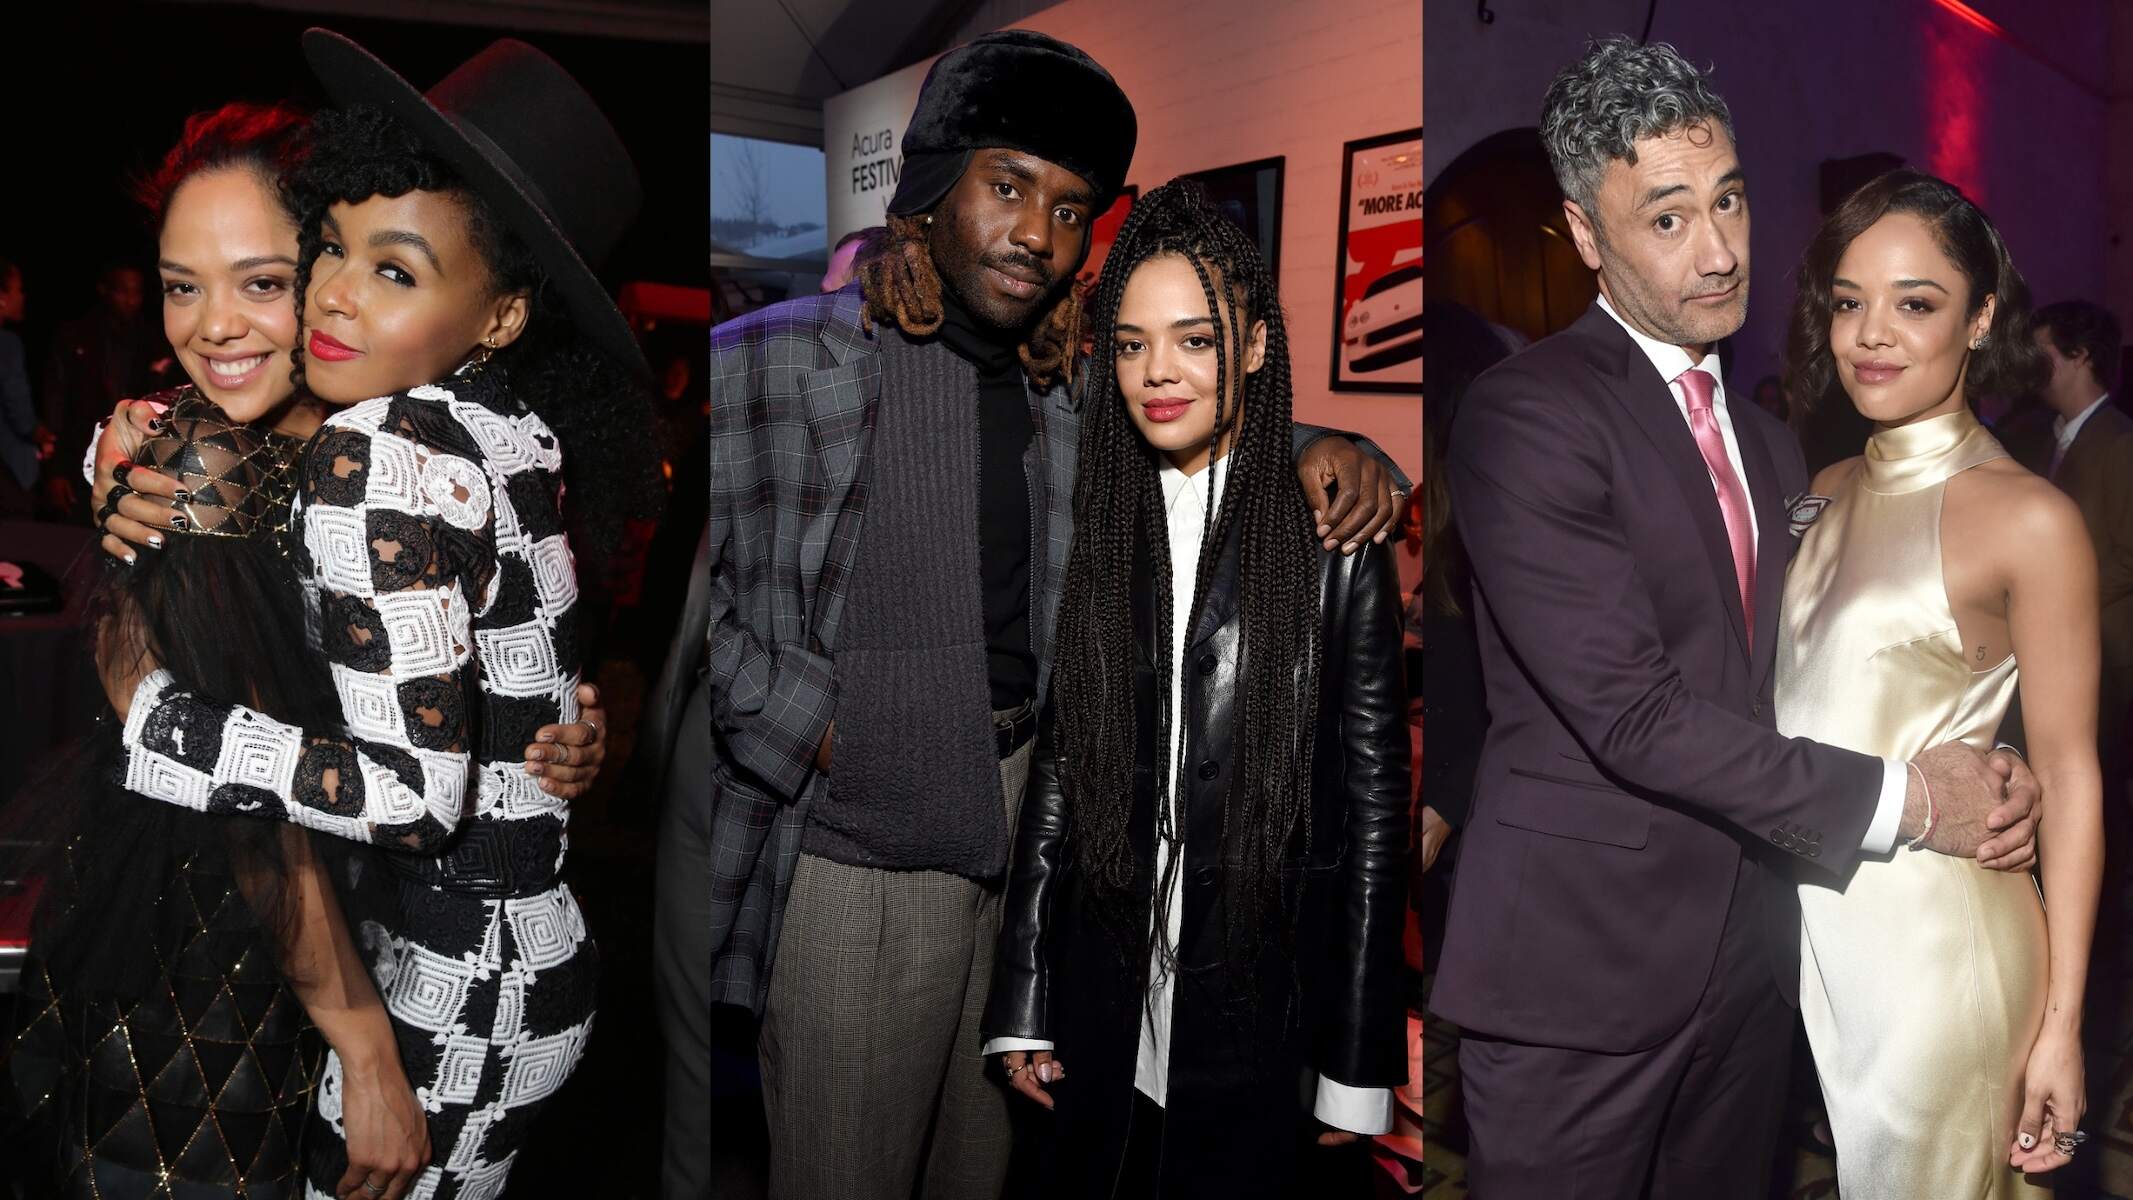 Actor Tessa Thompson poses with Janelle Monae, Dev Hynes, and Taika Waititi over the years